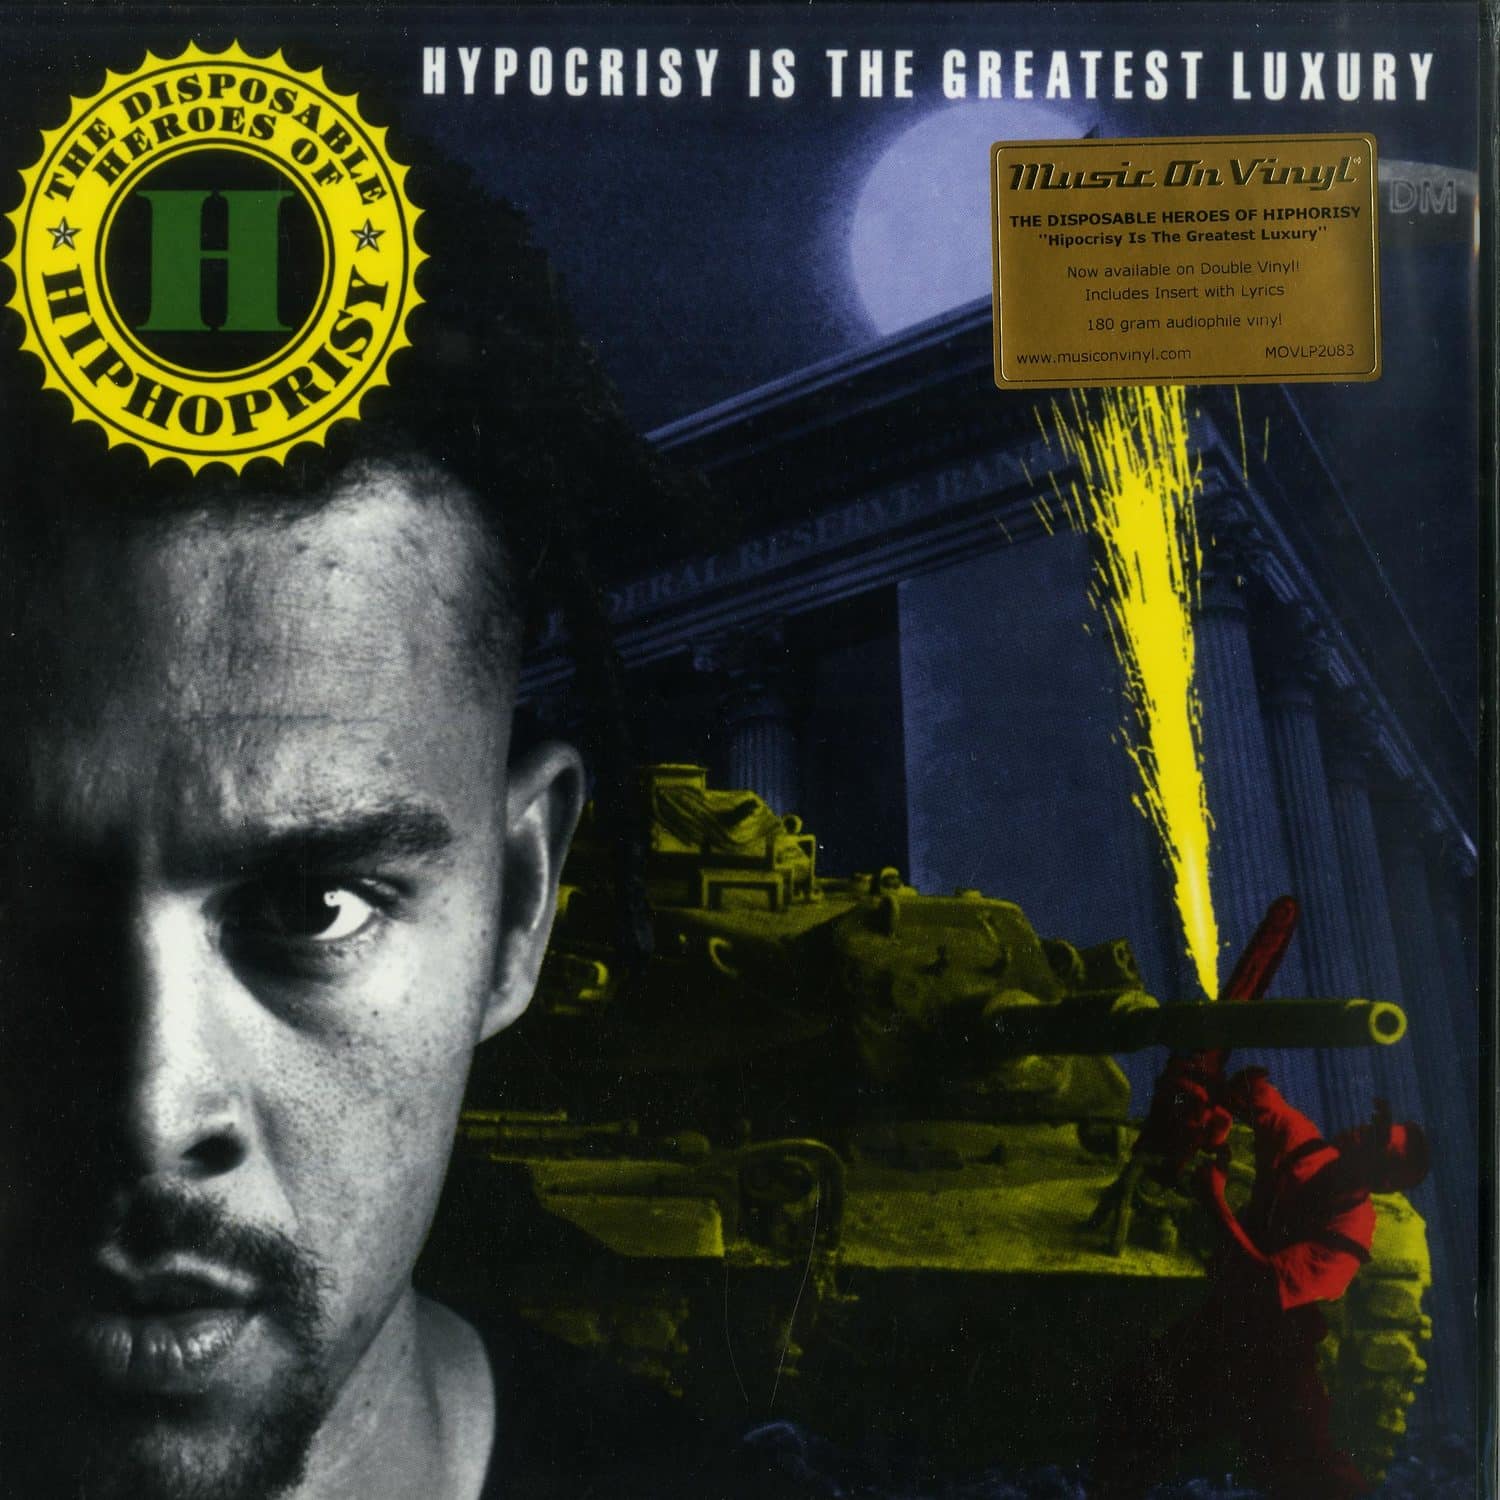 The Disposable Heroes of Hiphorisy - HYPOCRISY IS THE GREATEST LUXURY 